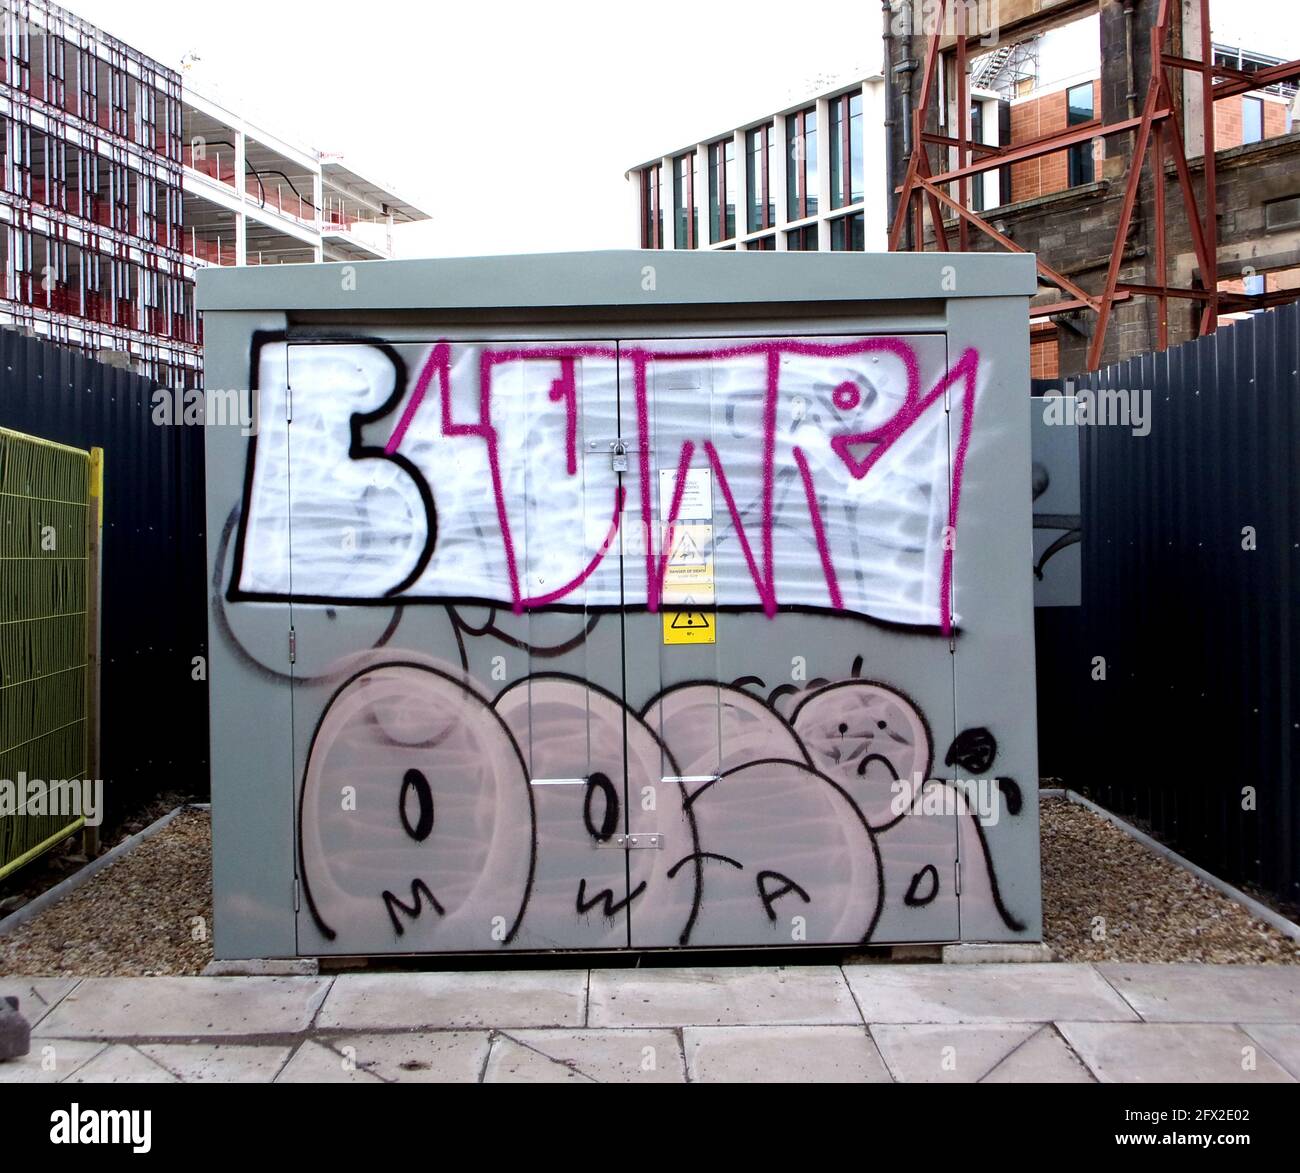 A striking example of graffiti on a concrete block  with buildings behind it in Glasgow. ©ALAN WYLIE/ALAMY Stock Photo